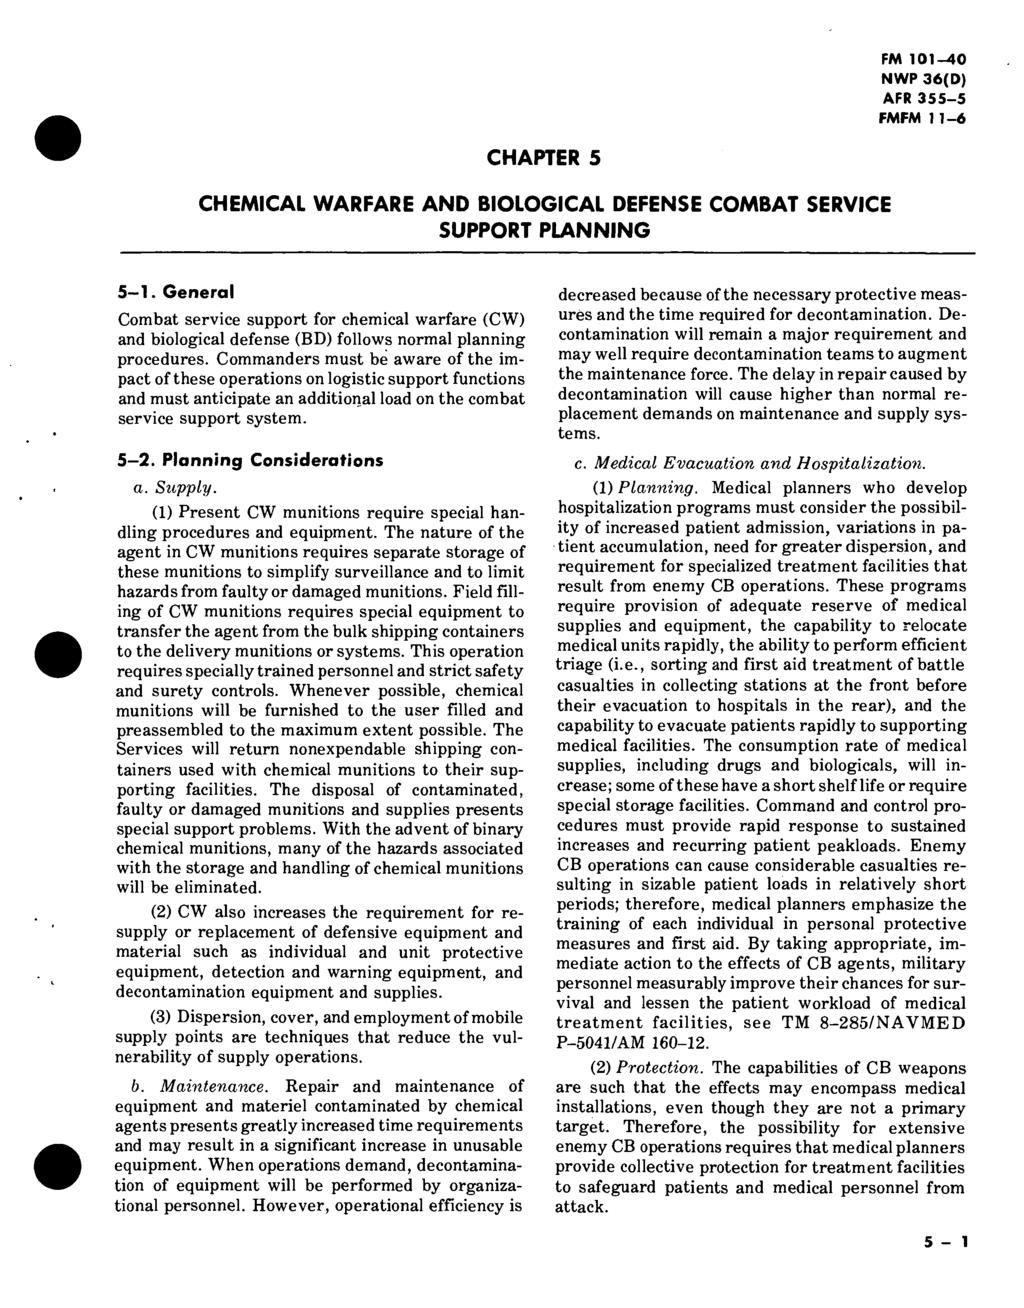 FMFM 1 1-6 CHAPTER 5 CHEMICAL WARFARE AND BIOLOGICAL DEFENSE COMBAT SERVICE SUPPORT PLANNING 5-1.